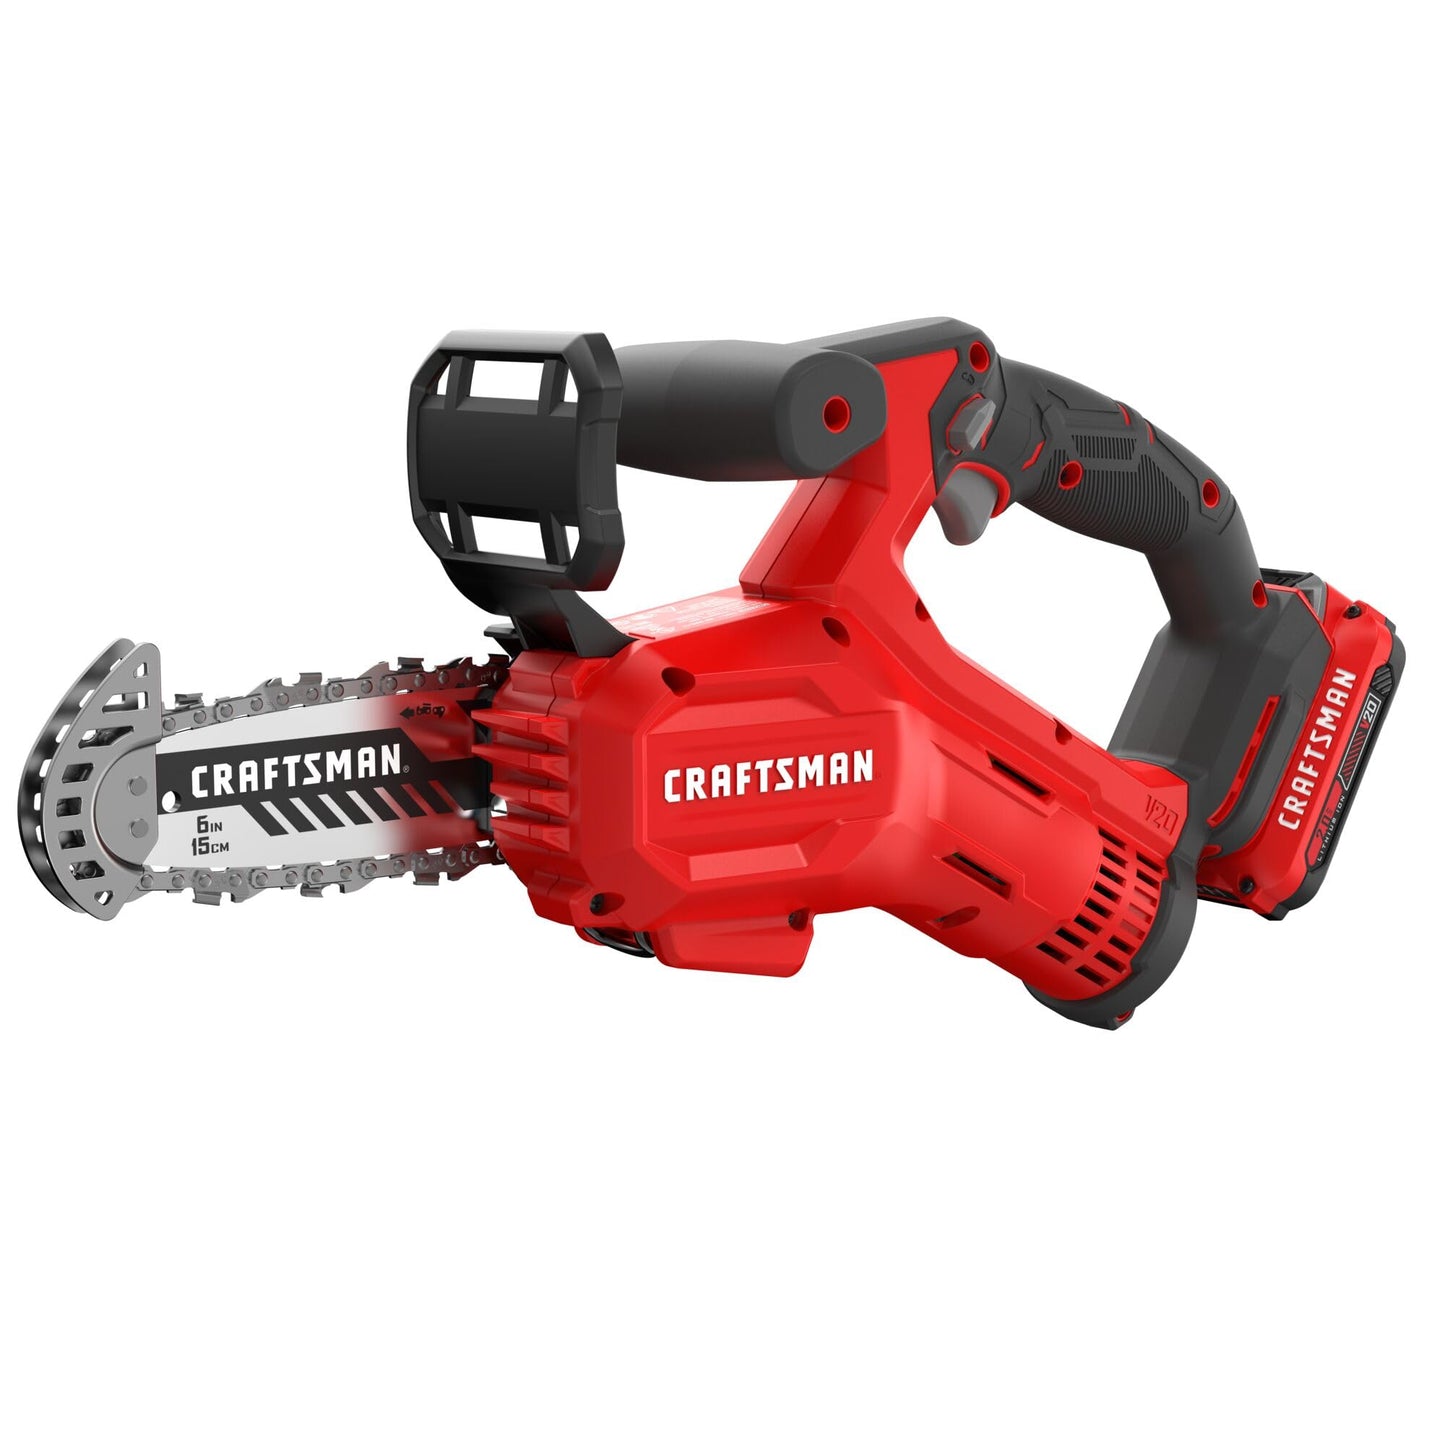 CRAFTSMAN V20 Cordless Pruning Saw, 6" Chain, Small Chainsaw with Battery and Charger Included (CMCCS320D1)